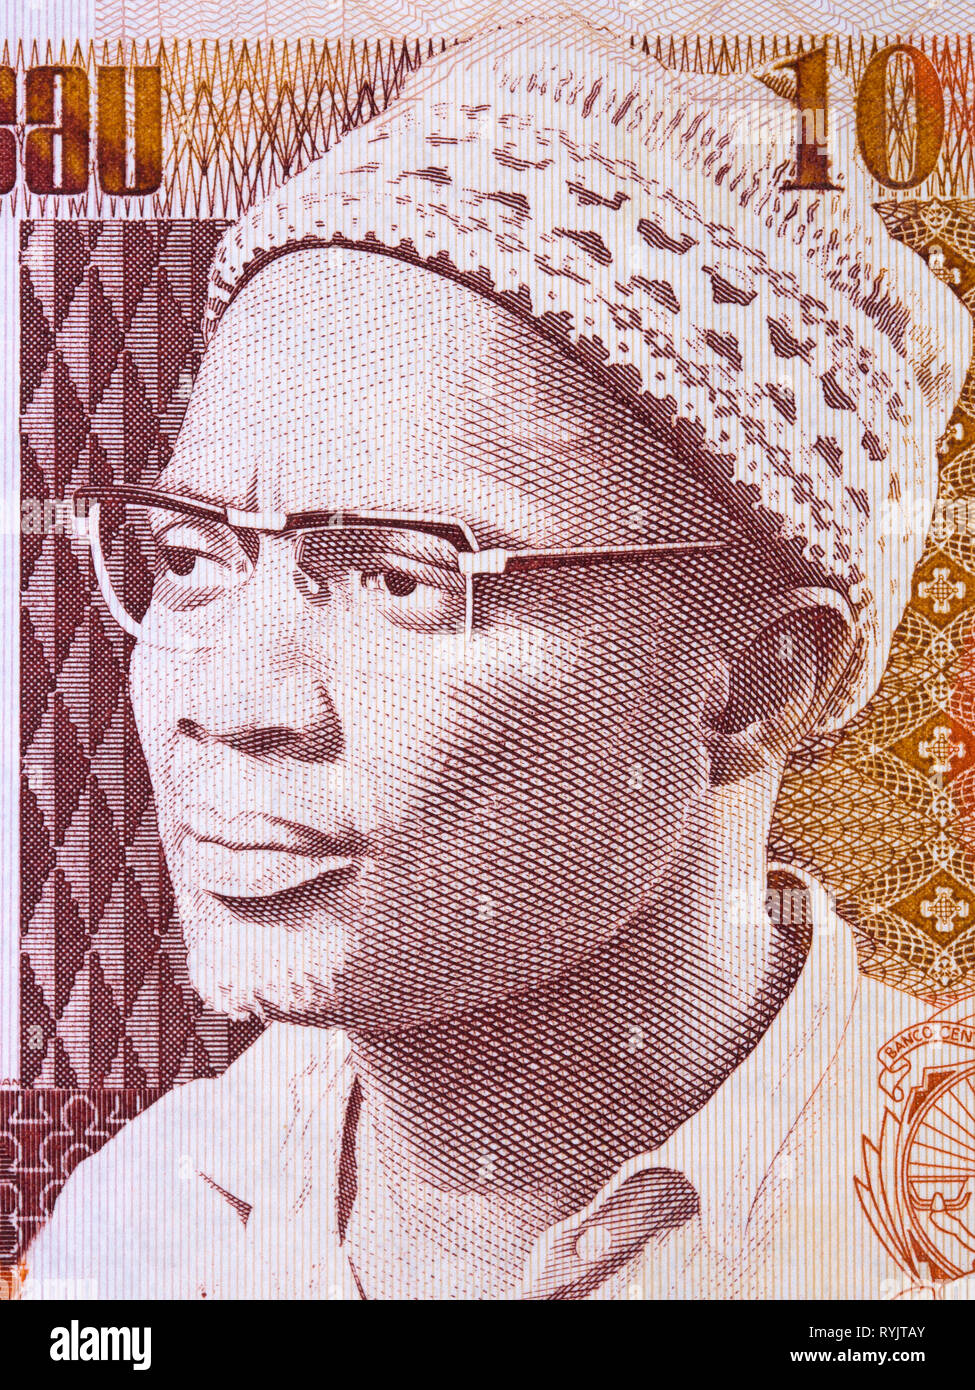 Amilcar Cabral a portrait from Guinea-Bissau money Stock Photo